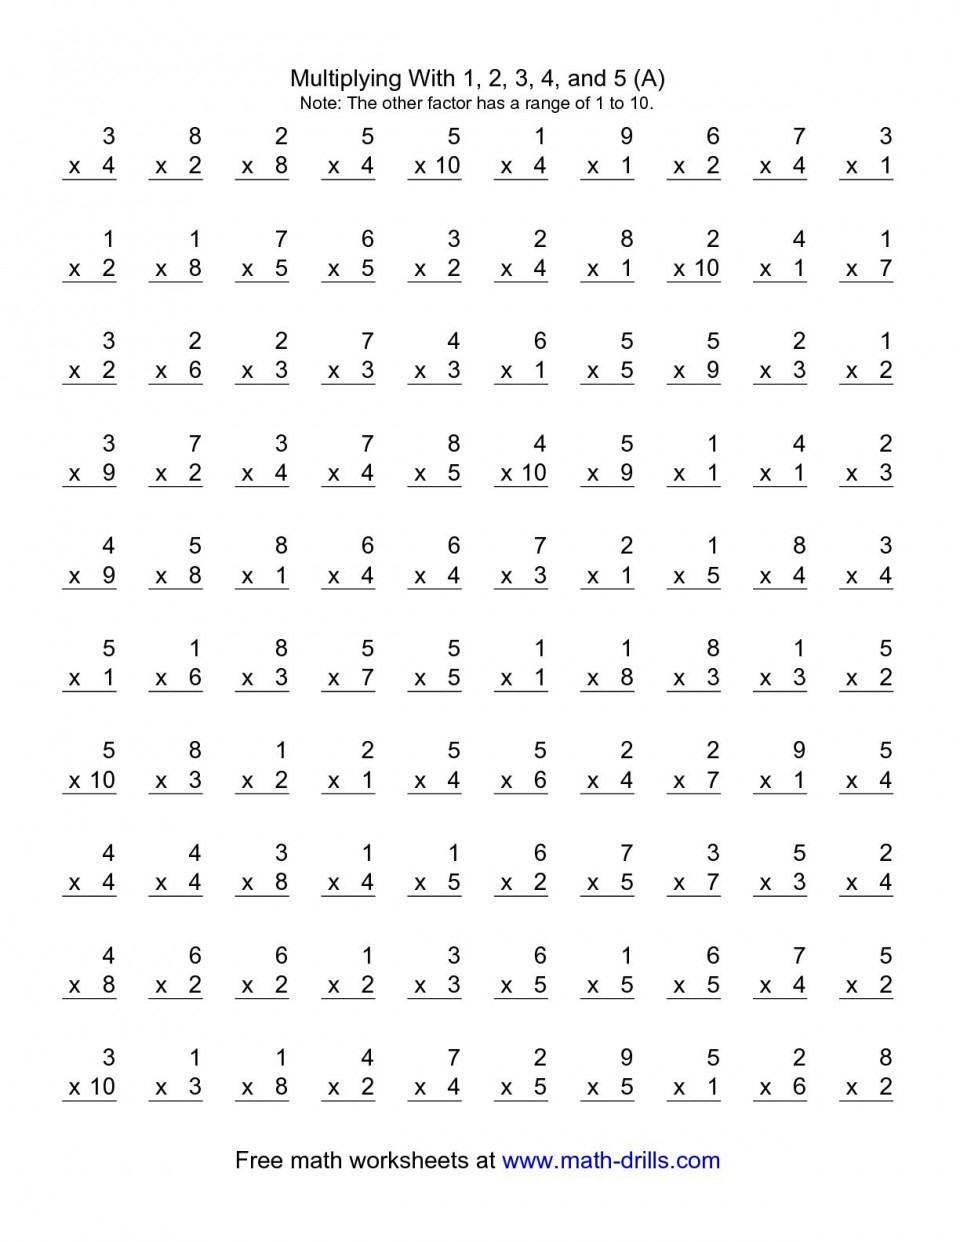 Multiplication Math Facts Worksheets Printable Breathtaking And | Free Printable Multiplication Worksheets 100 Problems